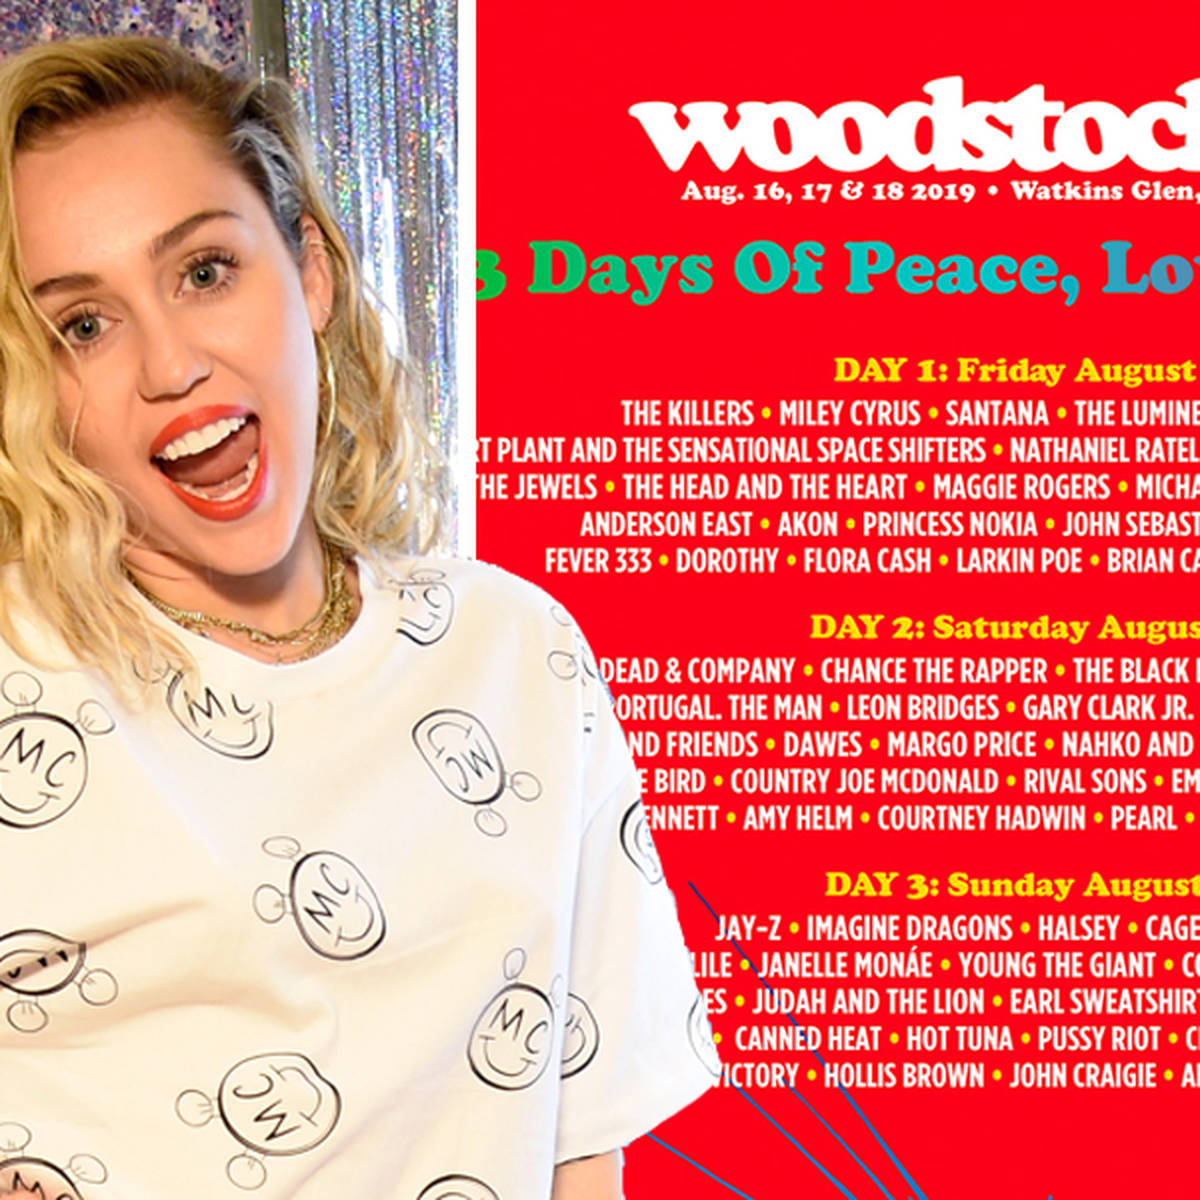 Woodstock 50 Lineup: Miley Cyrus, Jay-Z and The Killers confirmed 